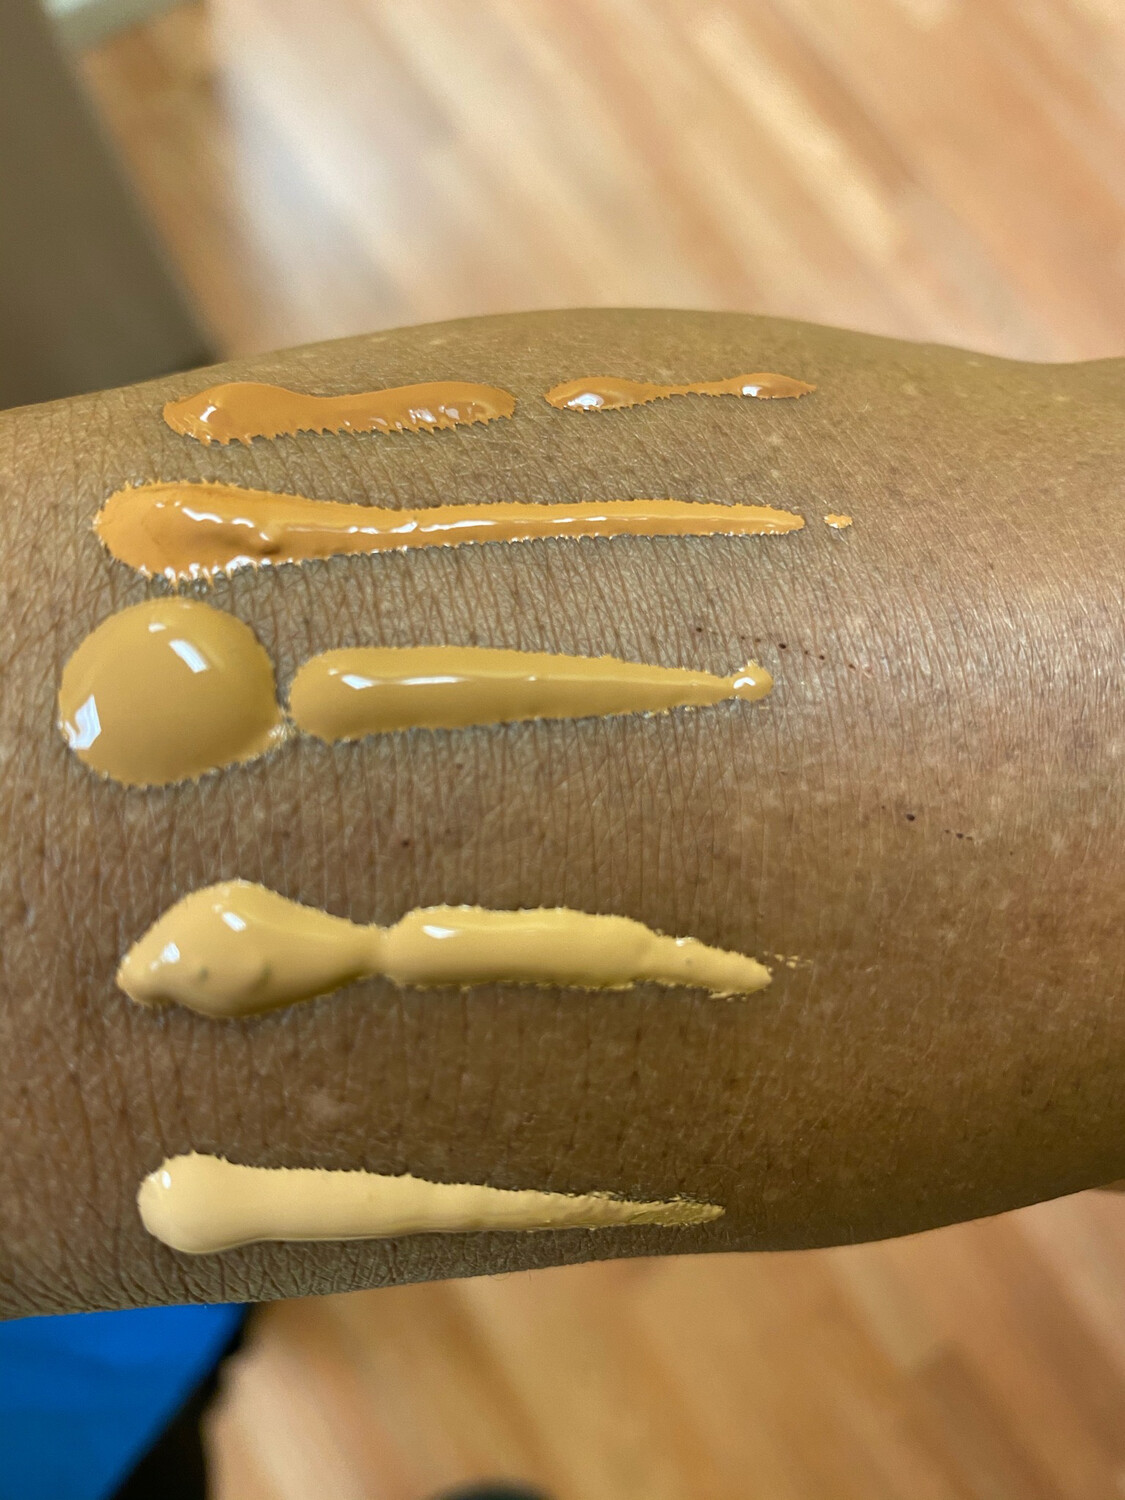 Try Foundations & BB Creams Before You Buy